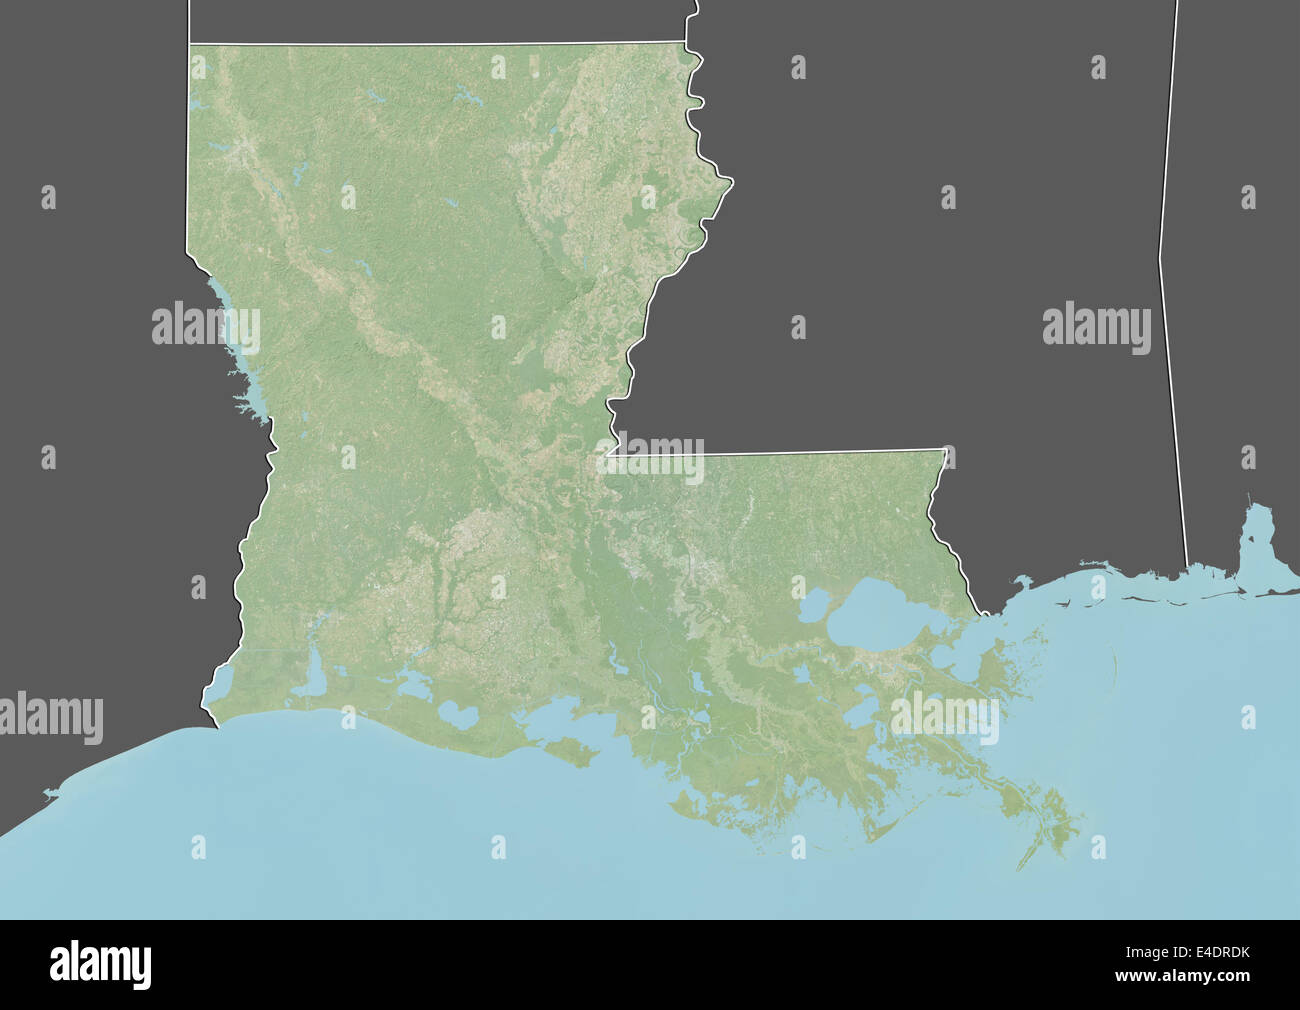 State of Louisiana, United States, Relief Map Stock Photo